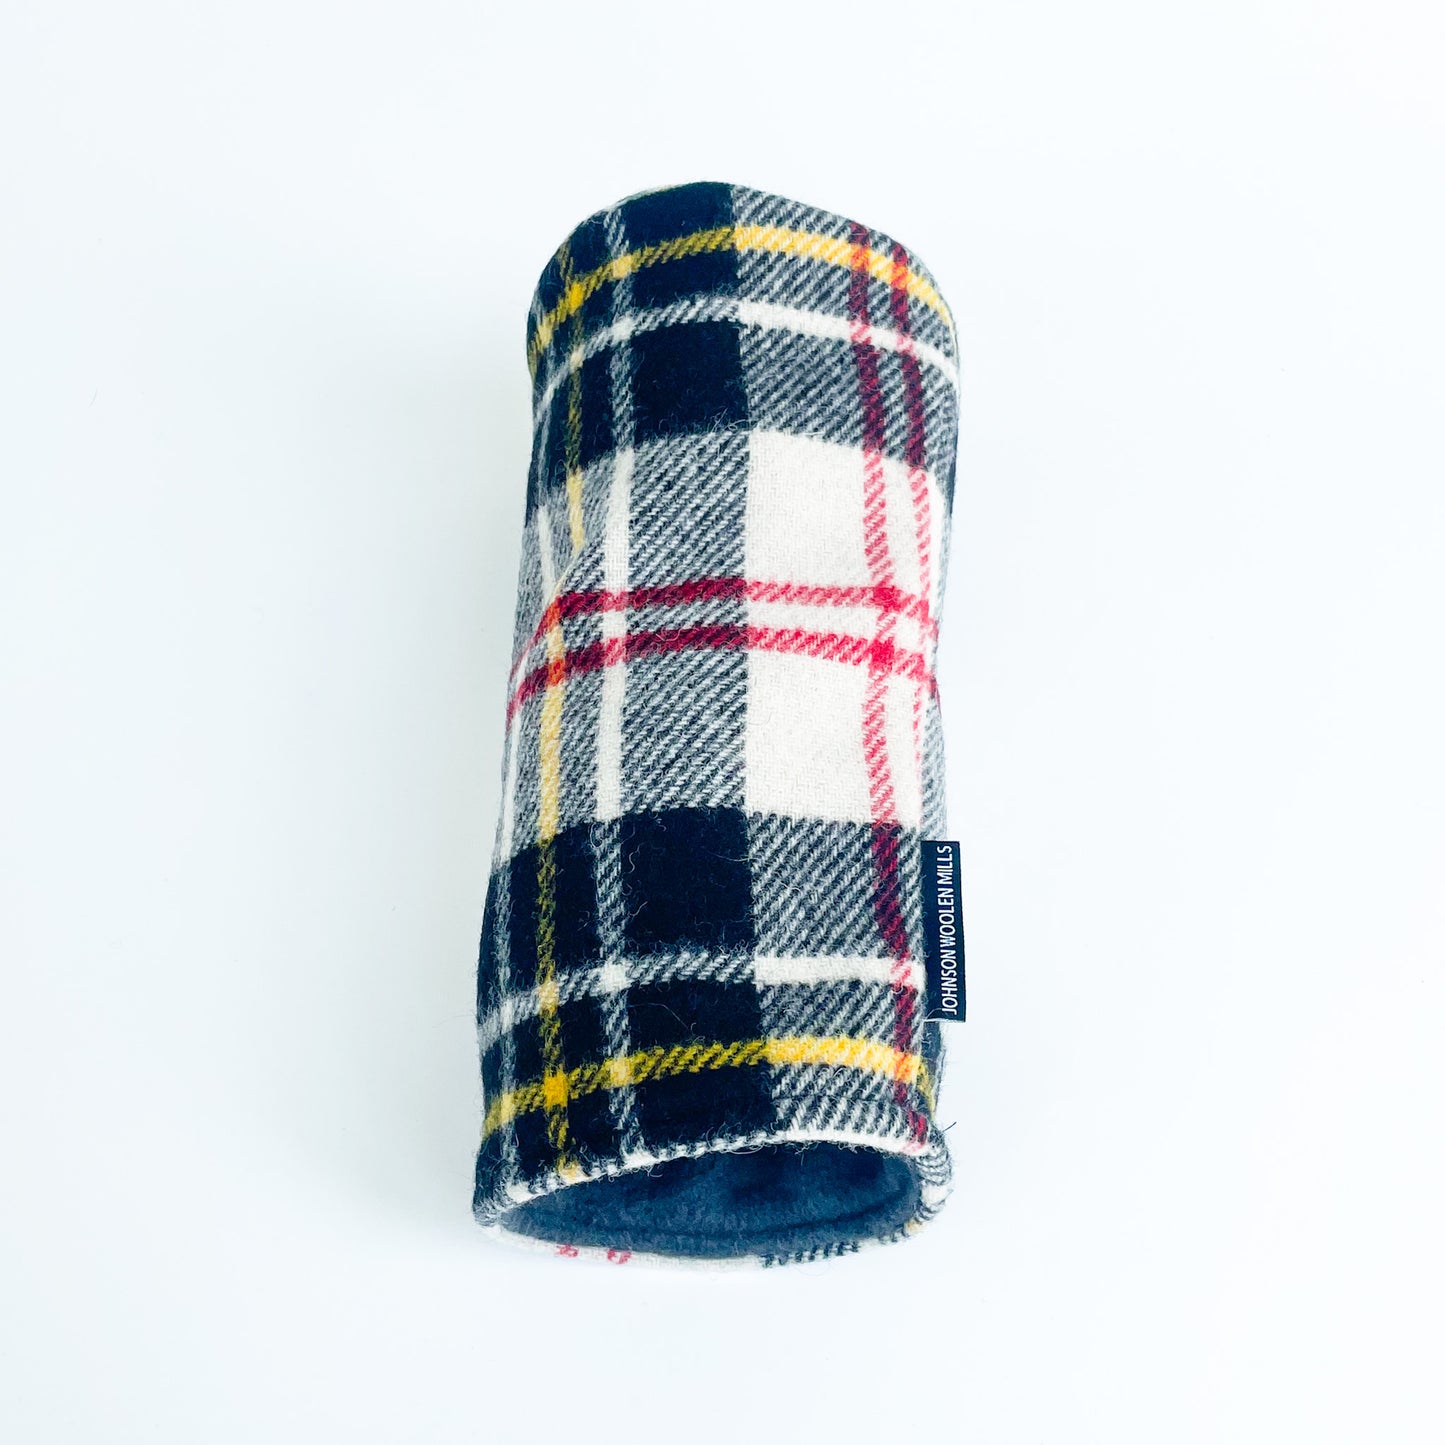 Black, White, yellow, red plaid wool driver headcover laying on side with fleece lining